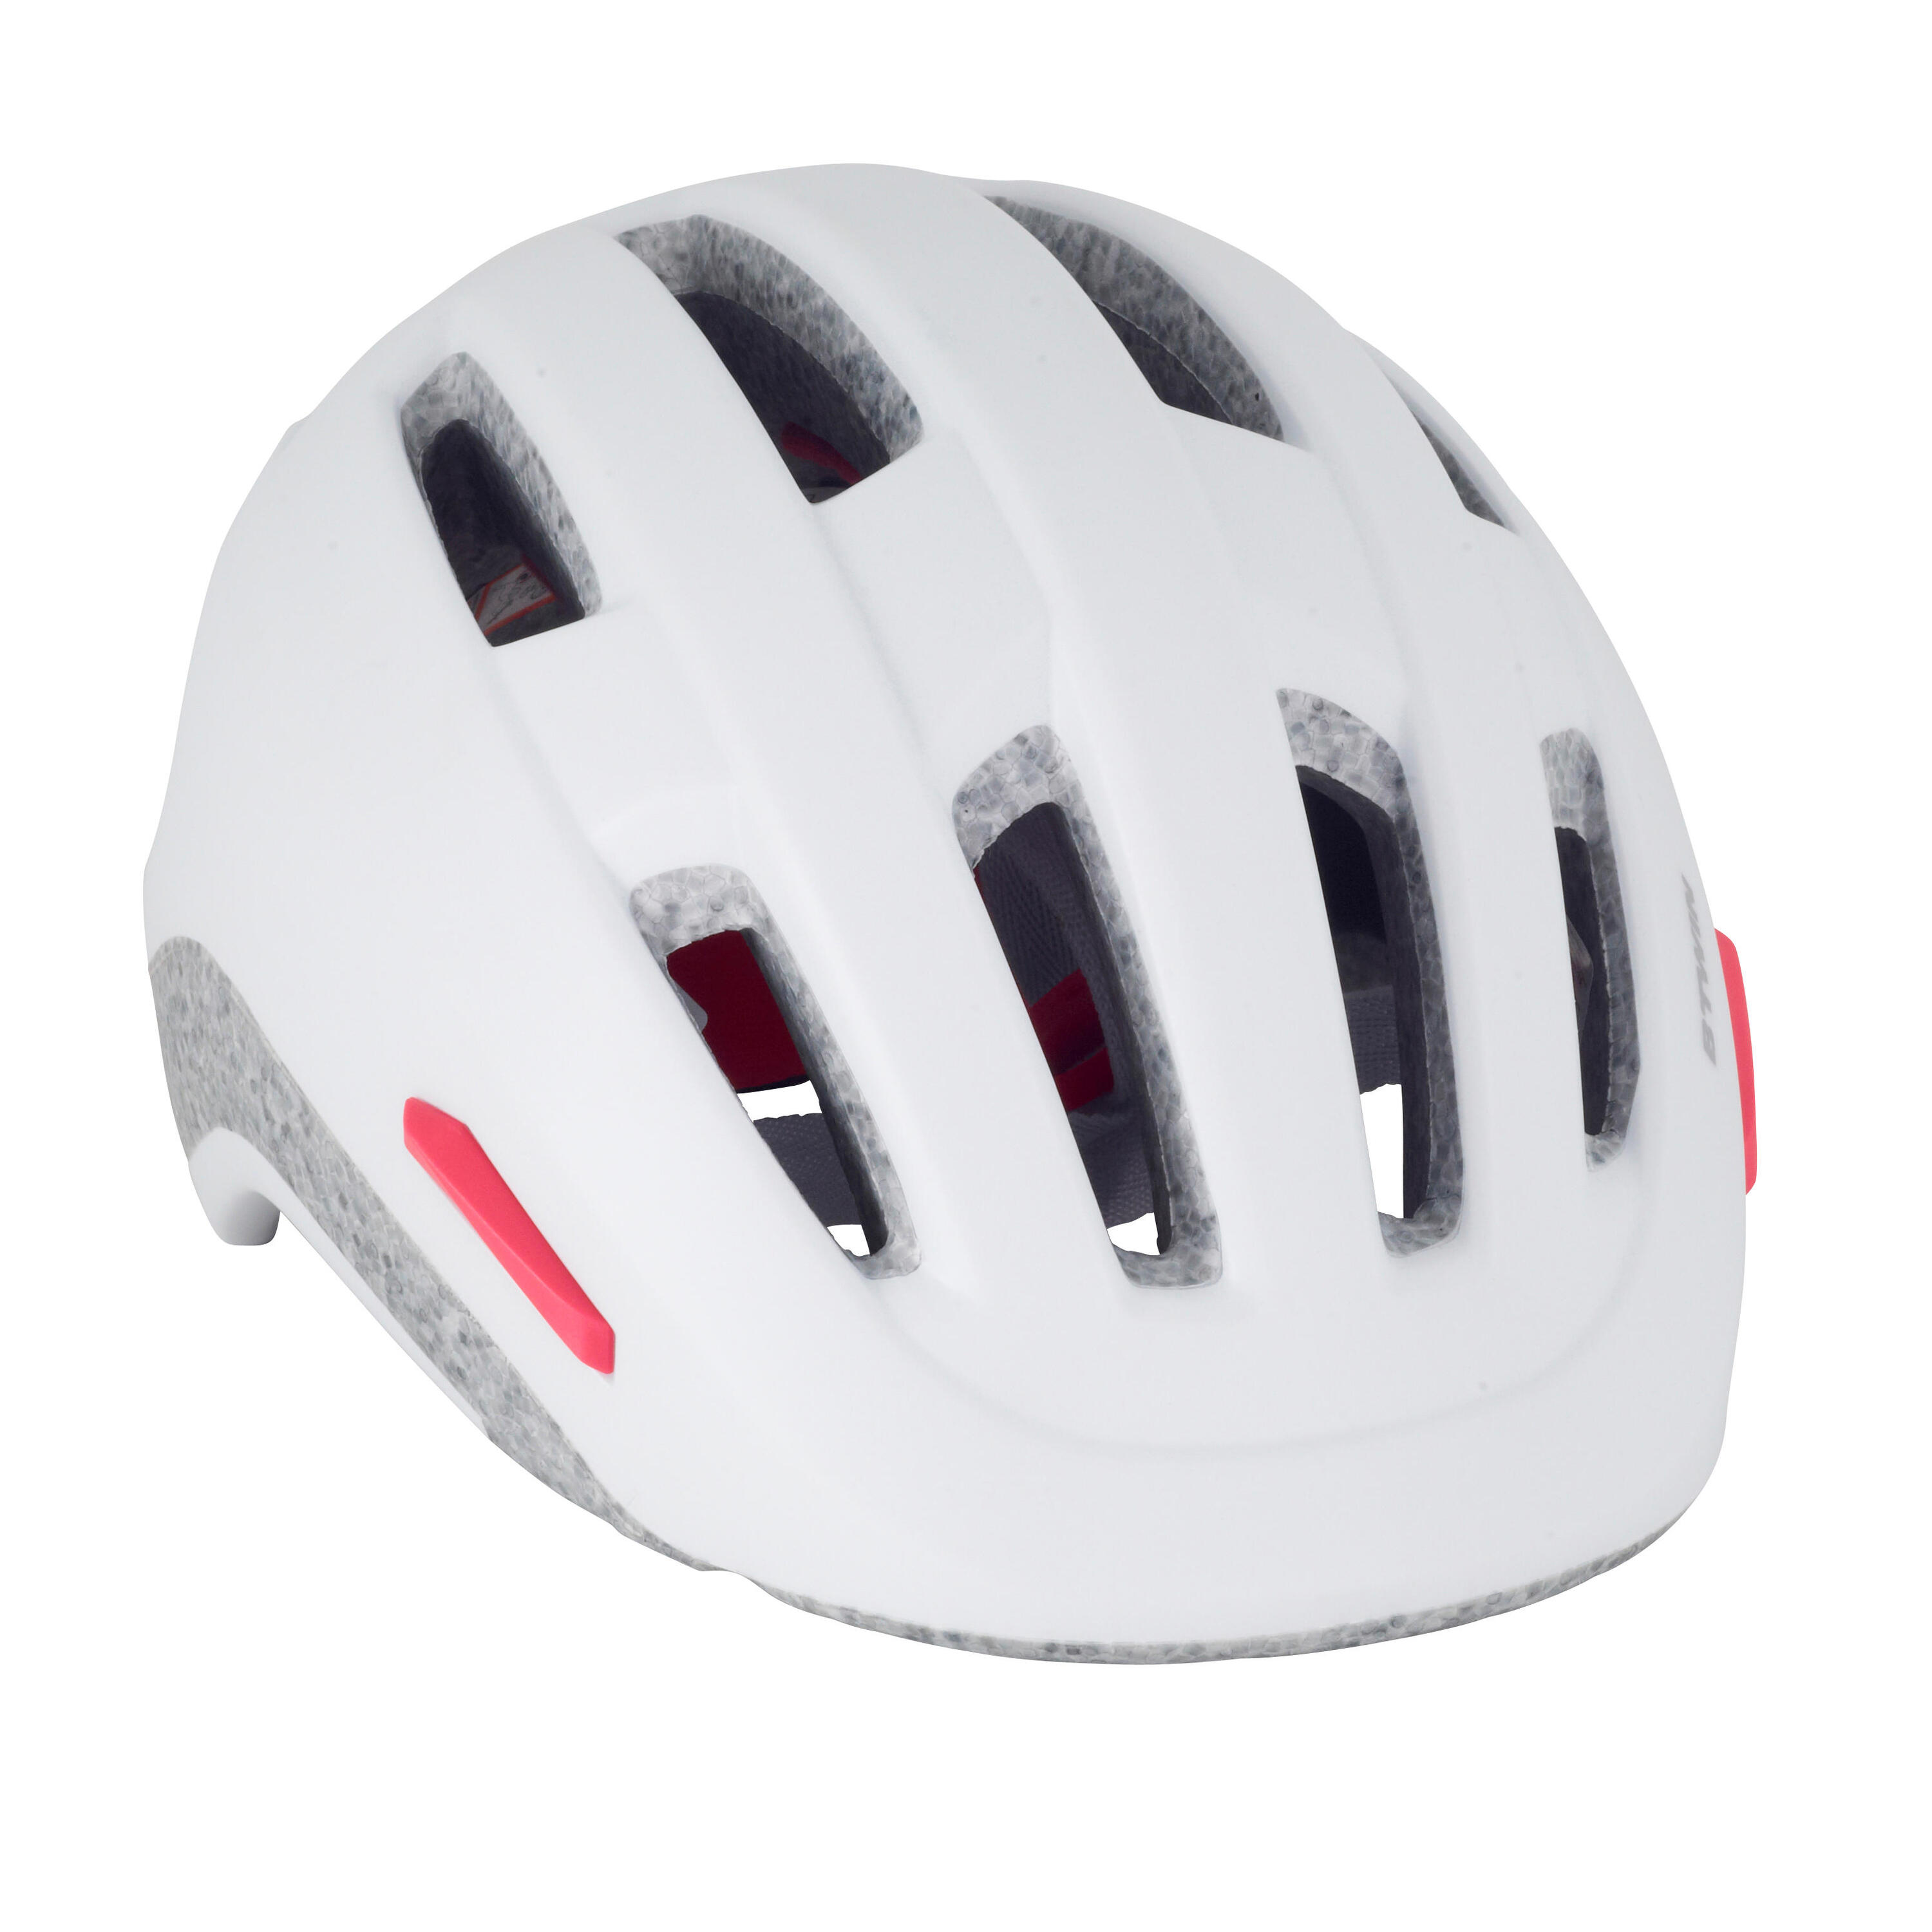 BTWIN 500 City Cycling Helmet - Whte